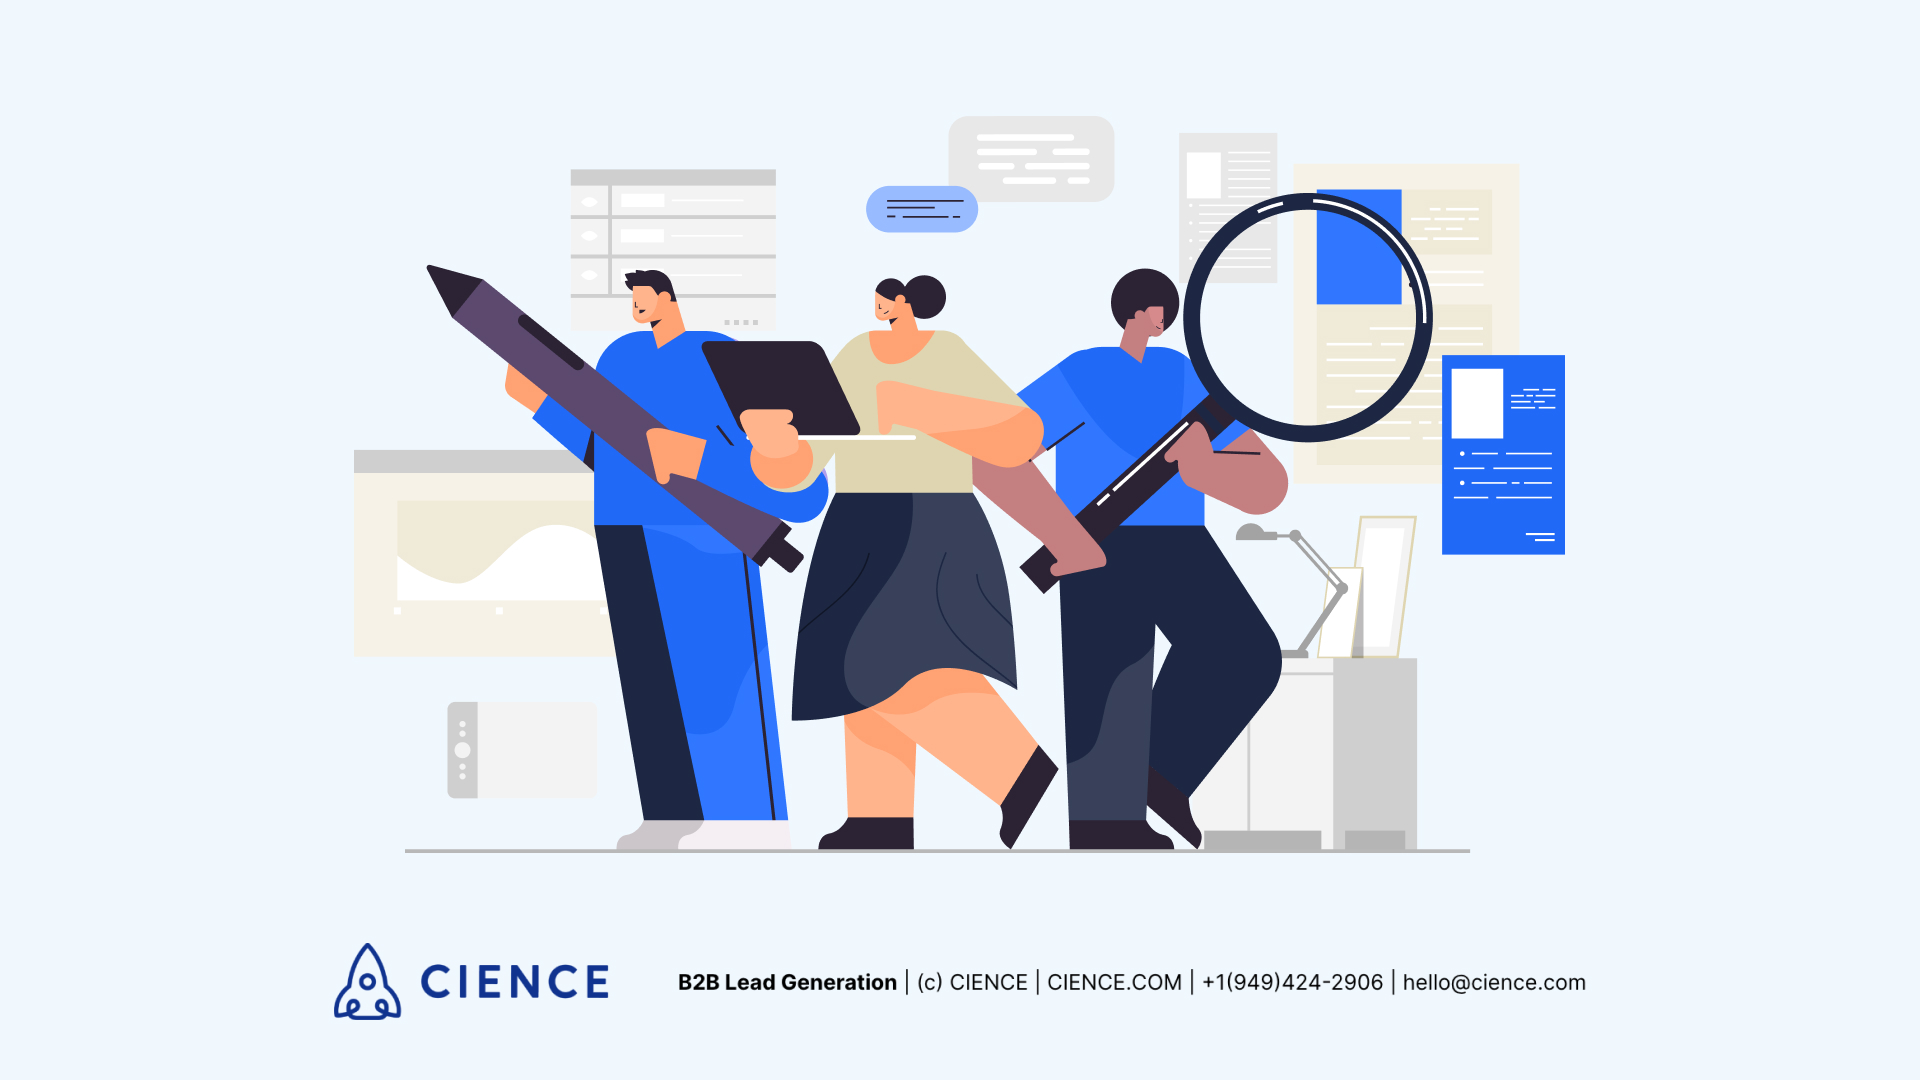 CIENCE Awarded Fortune’s Best Workplaces in Technology 2022